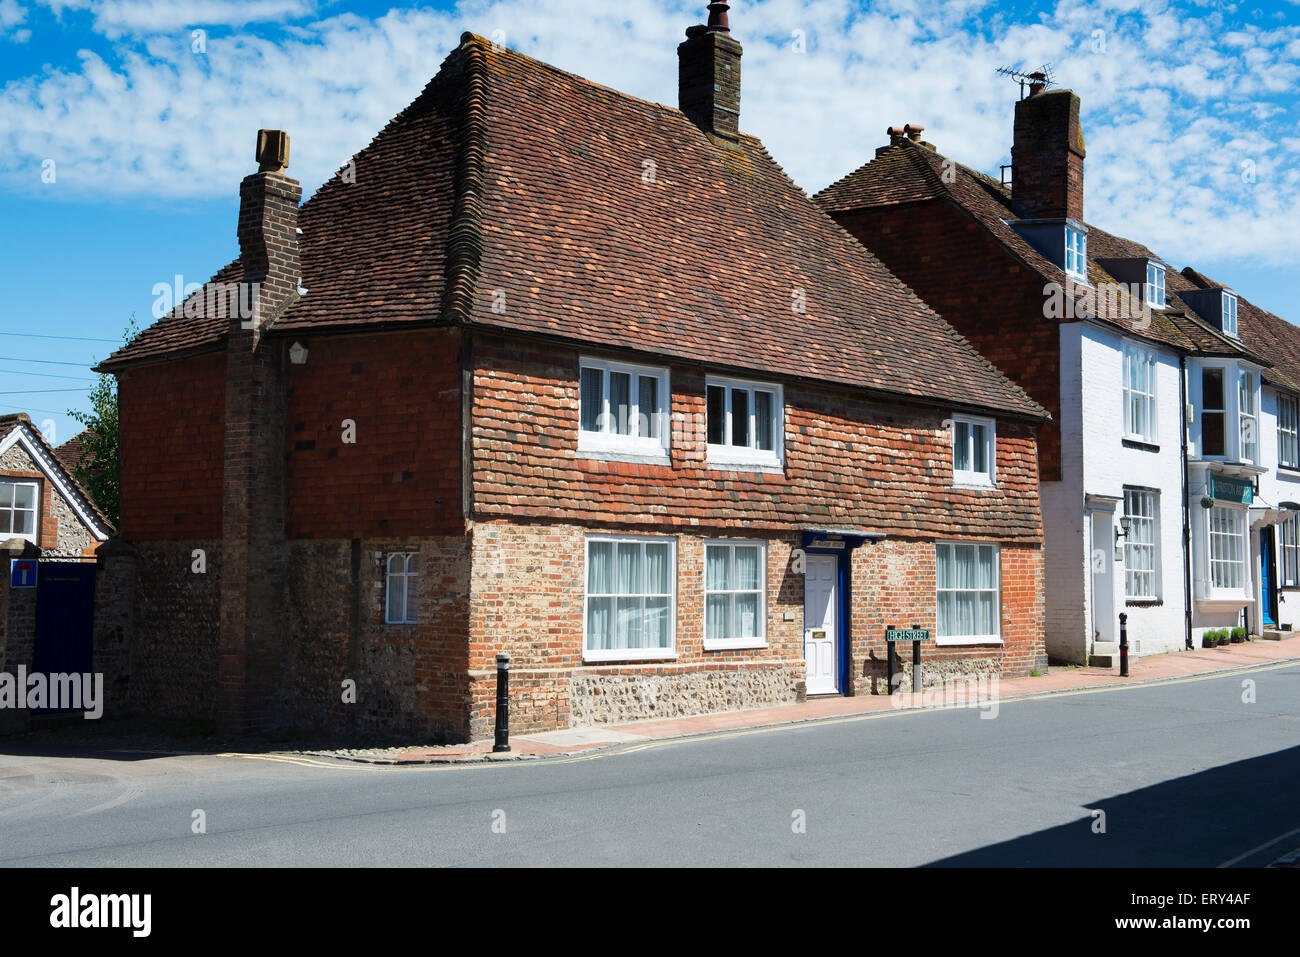 A brick, tile and flint cottage (the 'Manor House') on Alfriston village High Street Stock Photo